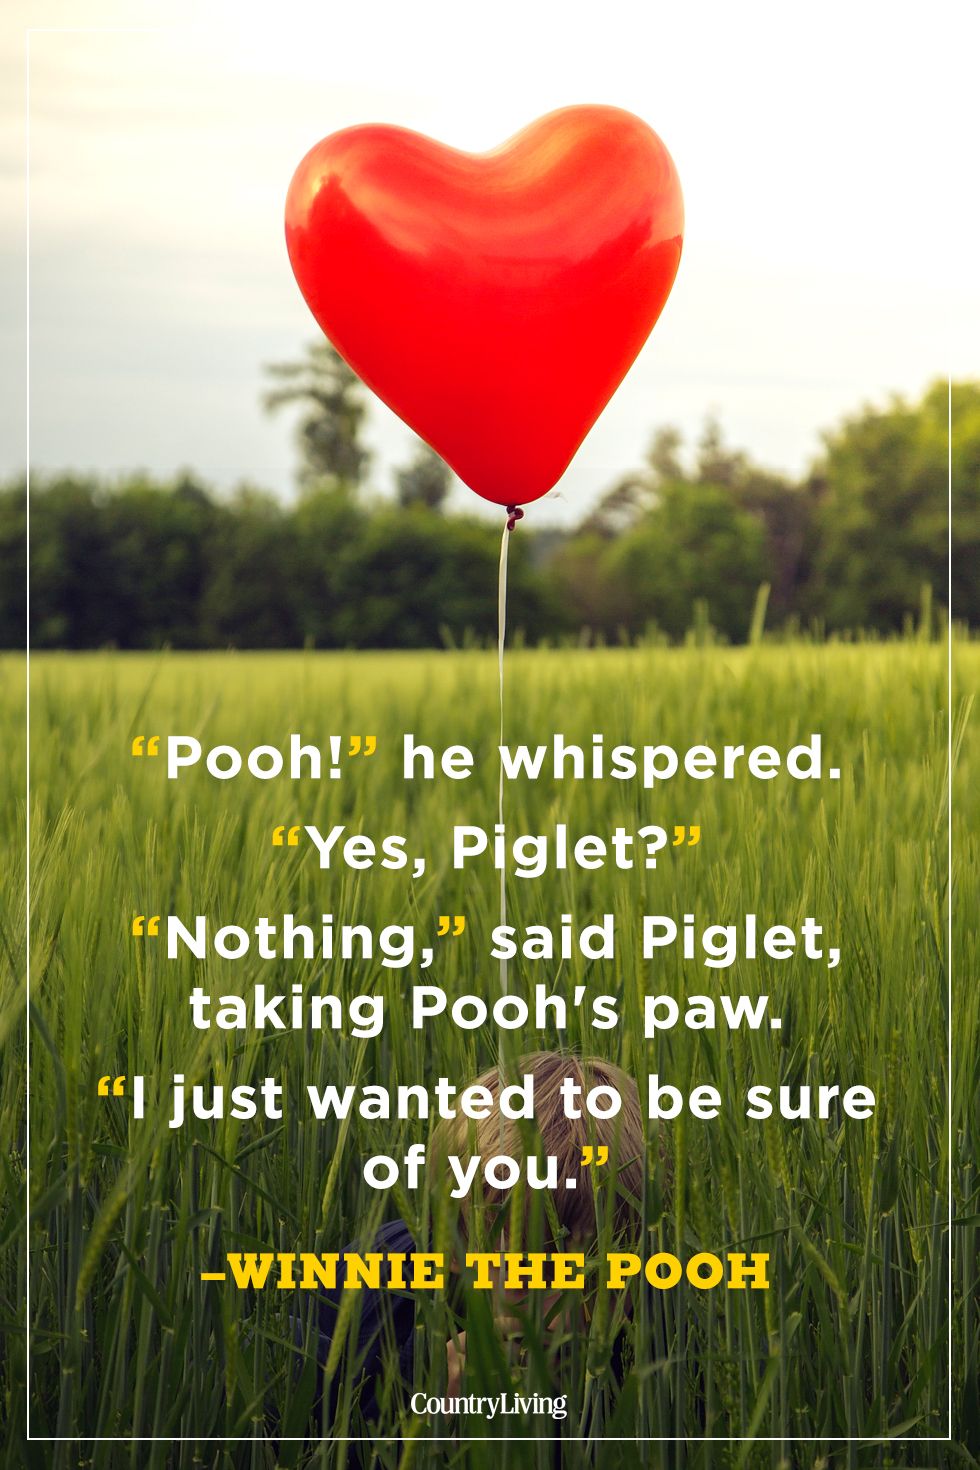 winnie-the-pooh-quotes-9-1533159702.jpg